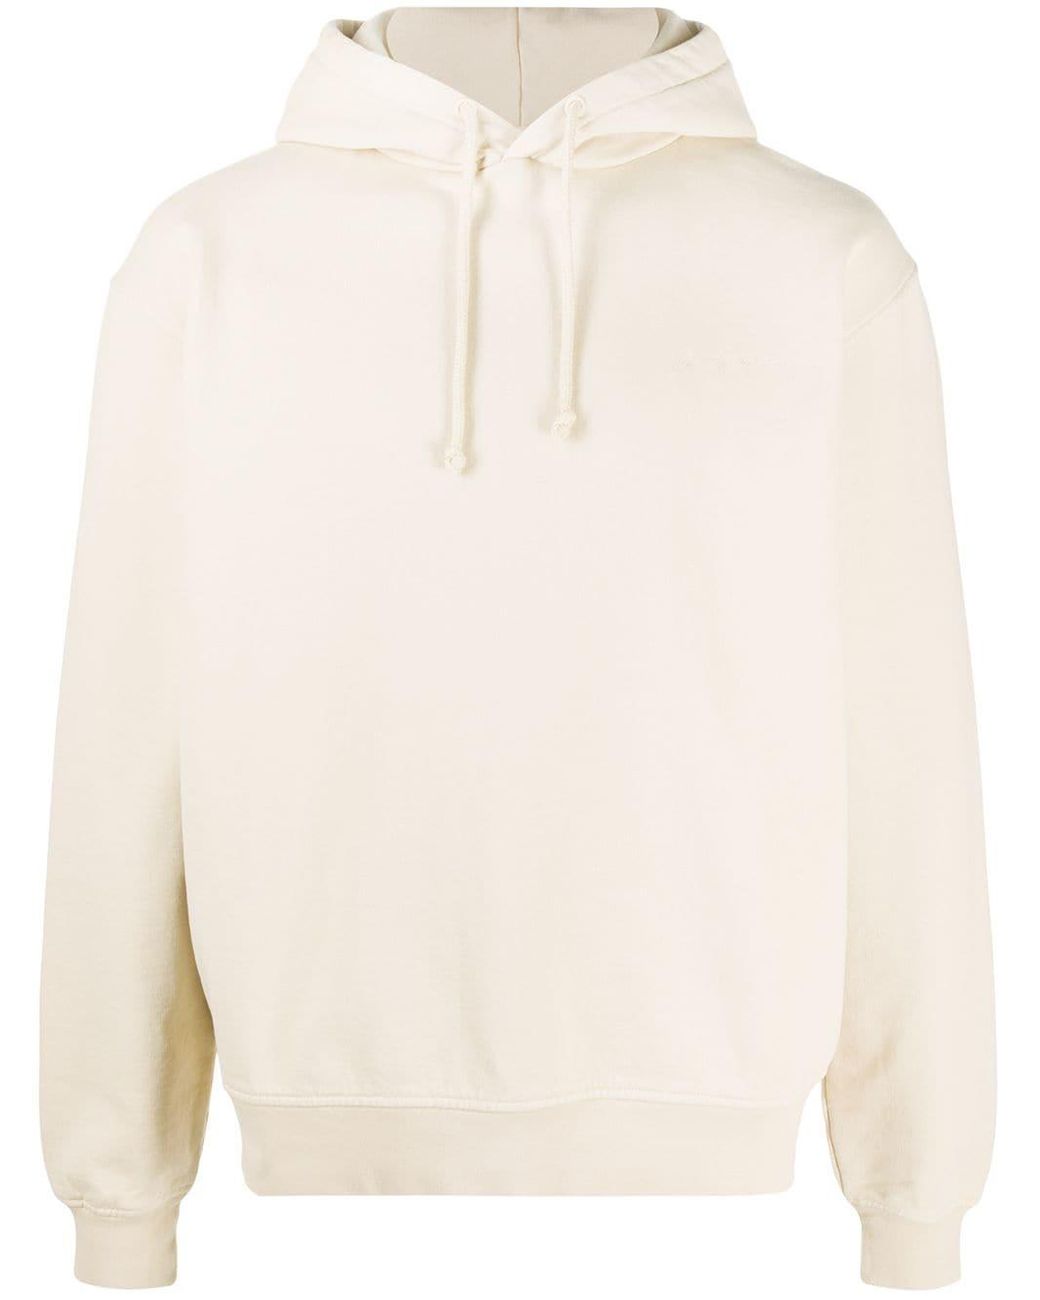 Jacquemus Cotton Long-sleeve Drawstring Hoodie in Natural for Men - Lyst